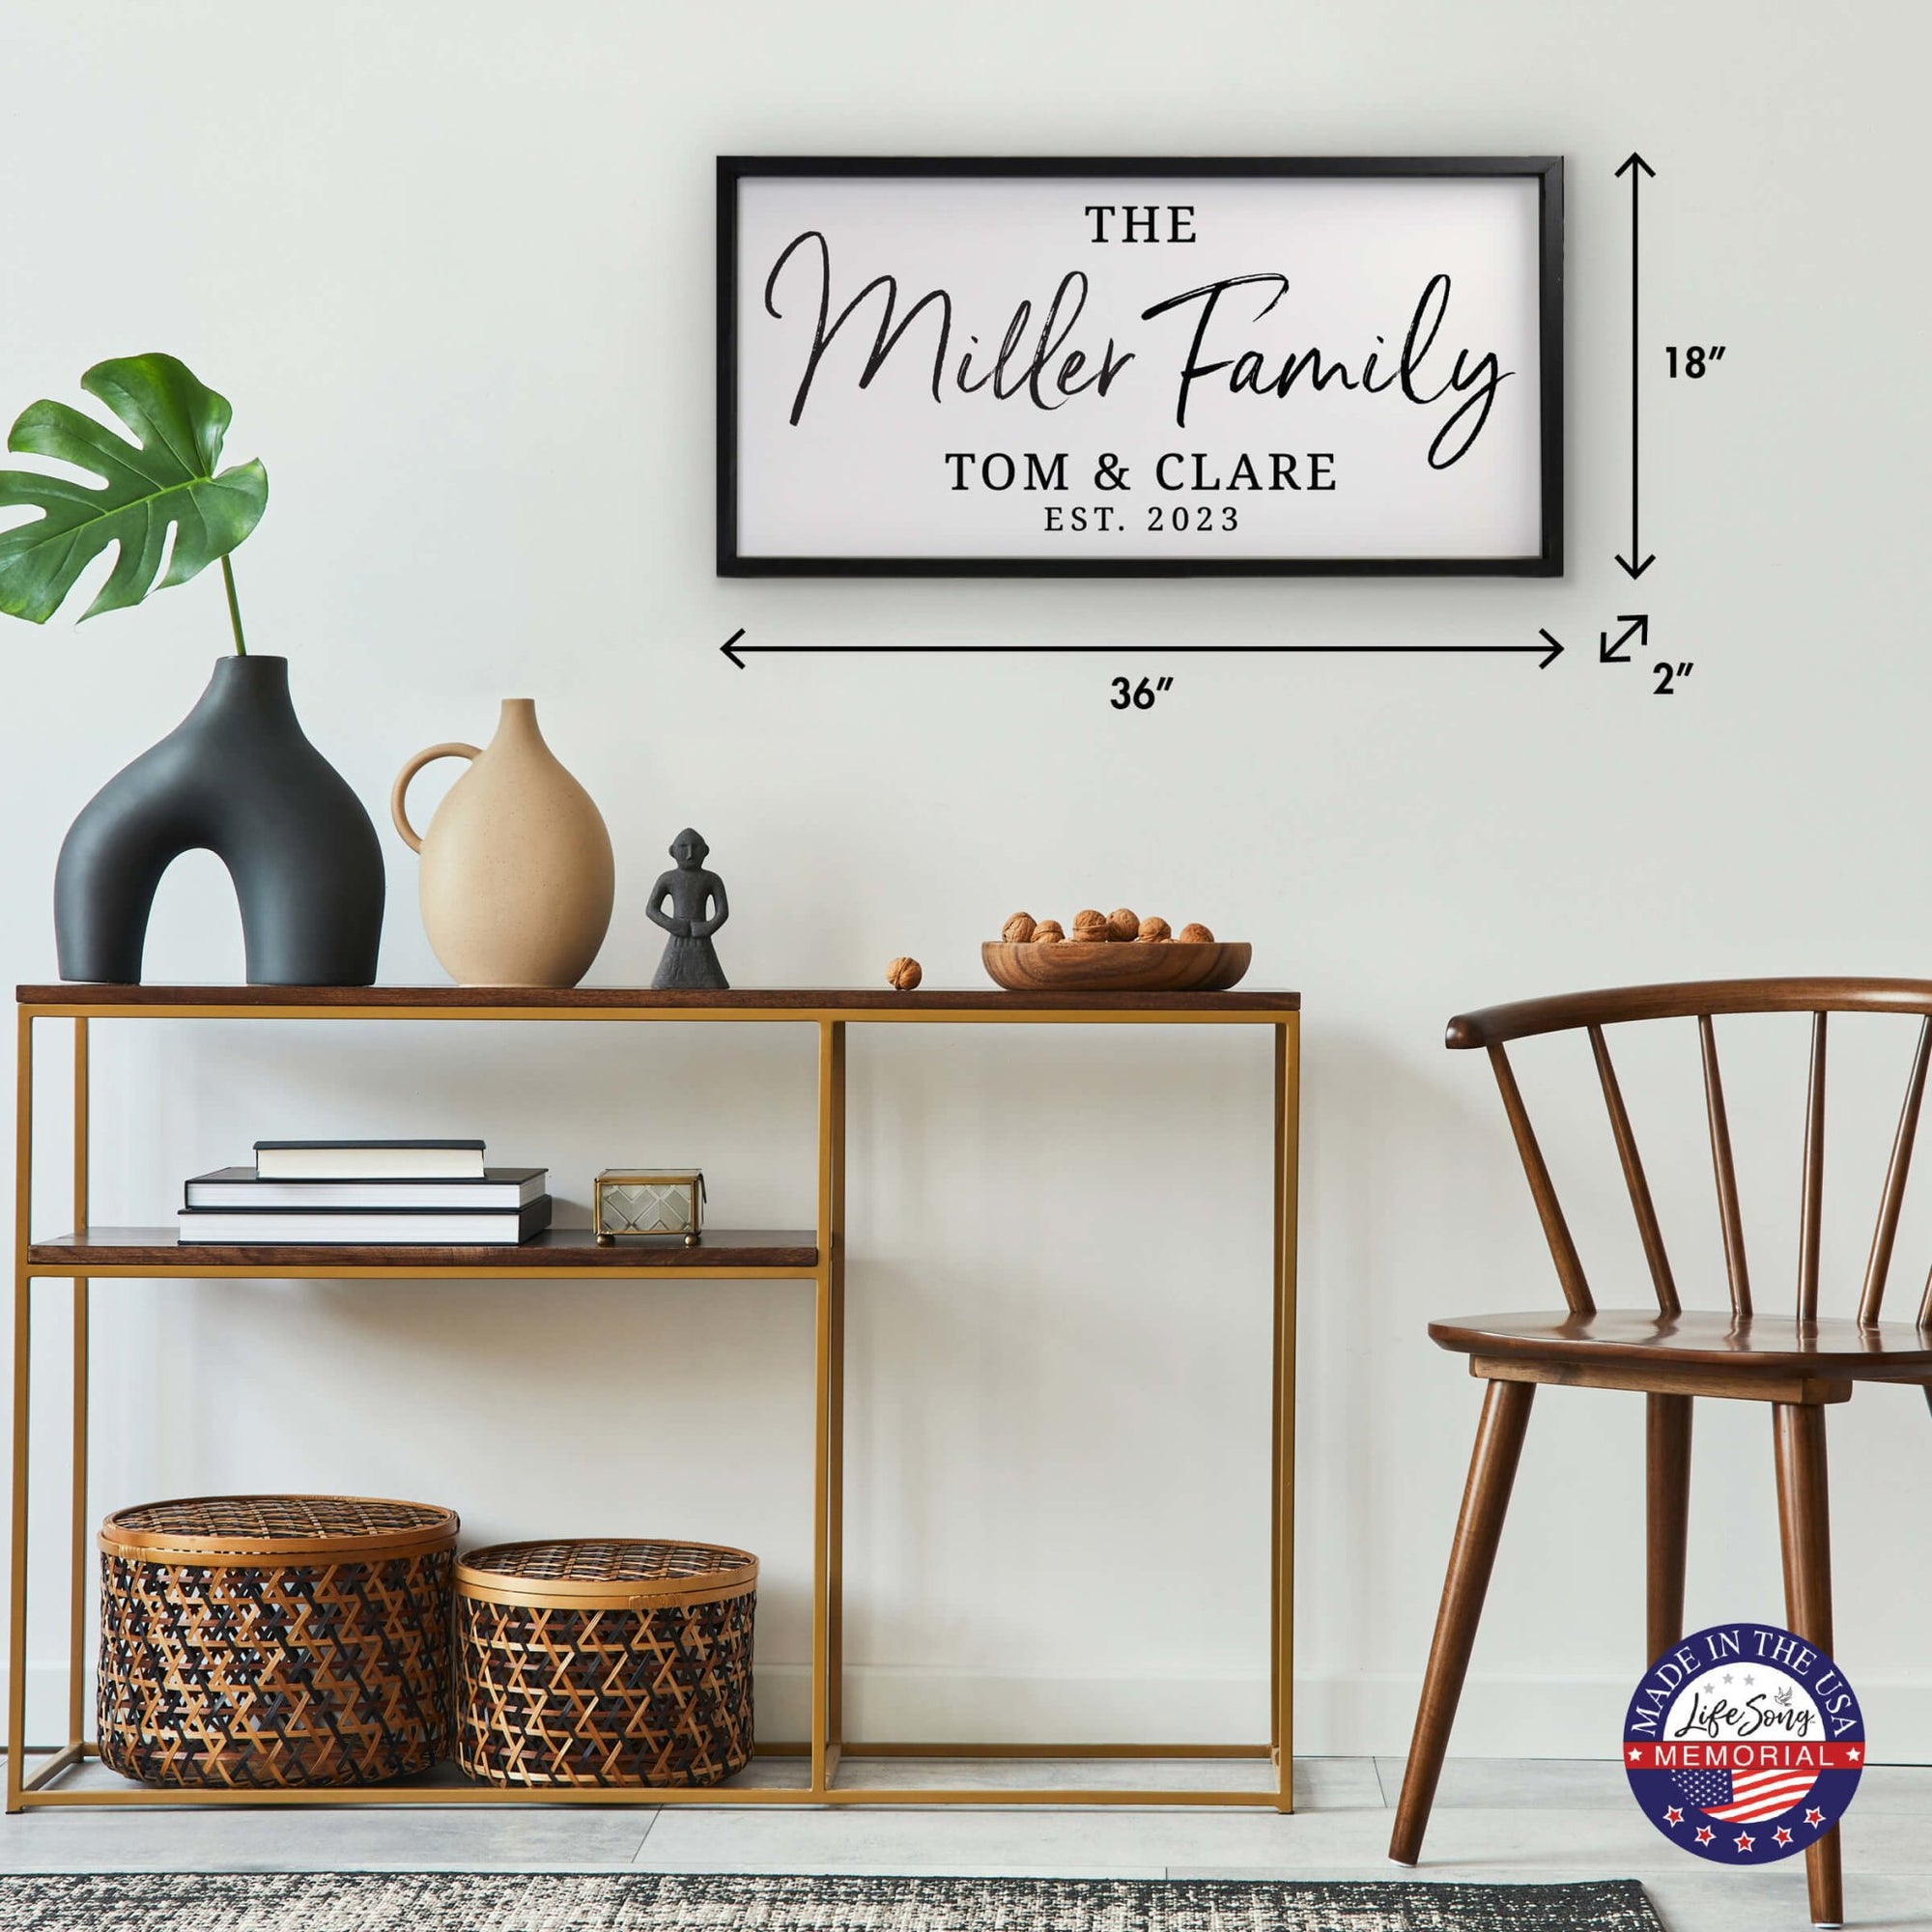 Custom Printed Family Wall Hanging Framed Shadow Box For Home Décor Ideas - The Miller Family - LifeSong Milestones